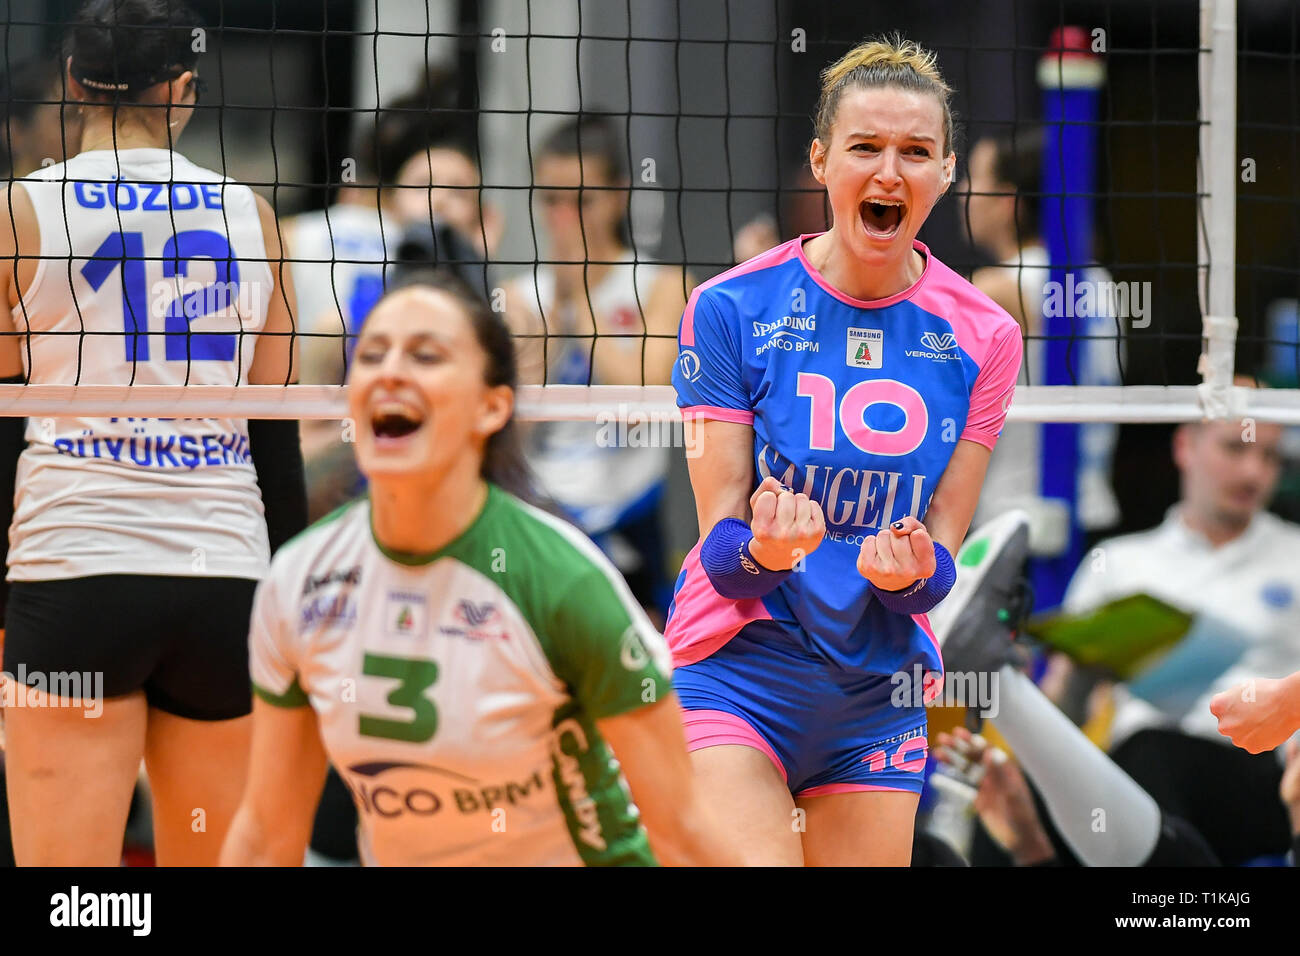 Candy Arena, Monza, Italy. 27th March, 2019. CEV Volleyball Challenge Cup women, Final, 2nd leg. Edina Begic of Saugella Monza exultation during the match between Saugella Monza and Aydin BBSK at the Candy Arena Italy.  Credit: Claudio Grassi/Alamy Live News Stock Photo